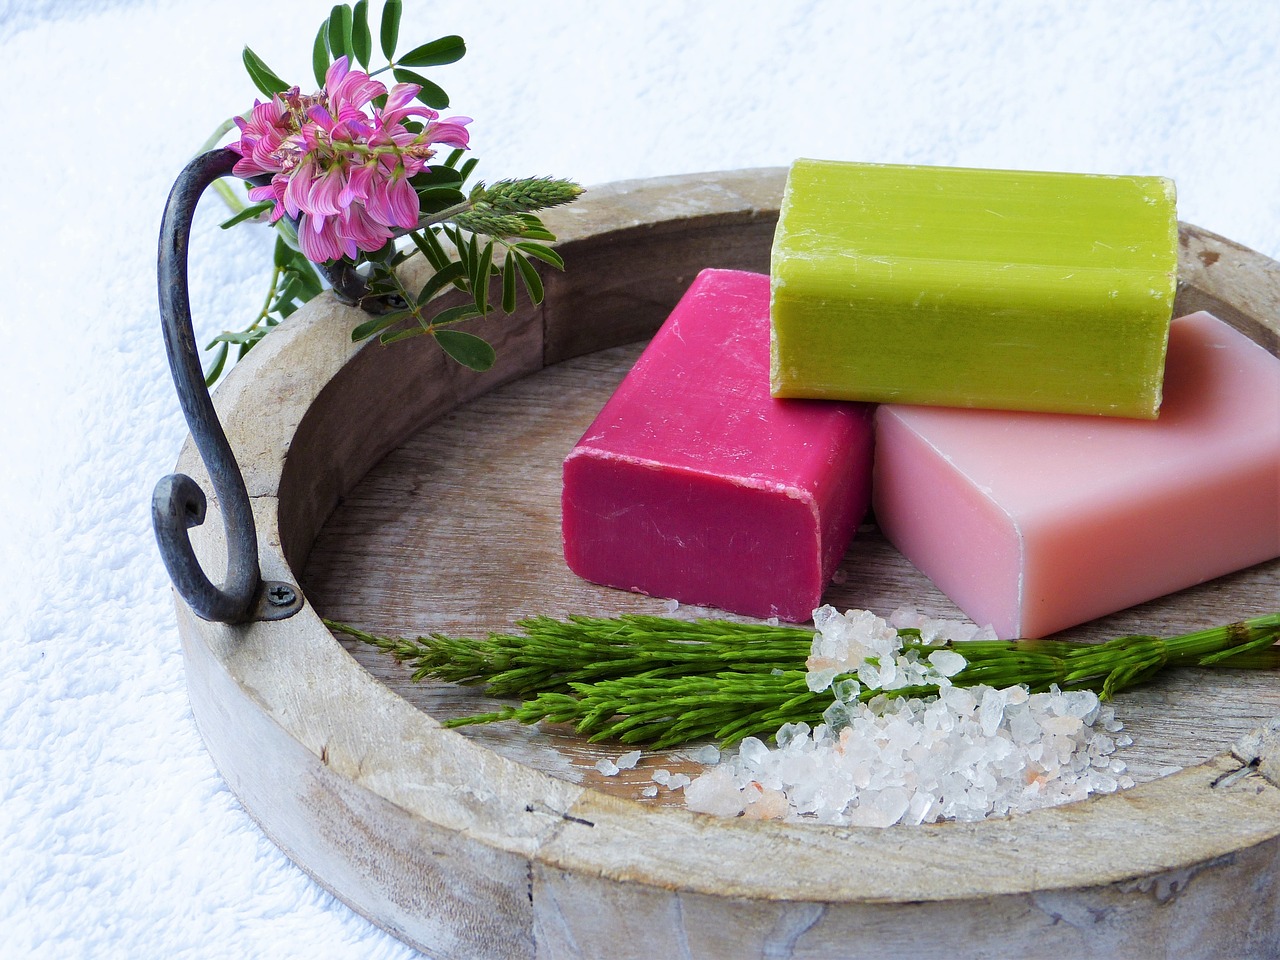 Amsterdam's Soap Stories has a colourful collection of bath and skincare products (Image Credit: Pixabay)